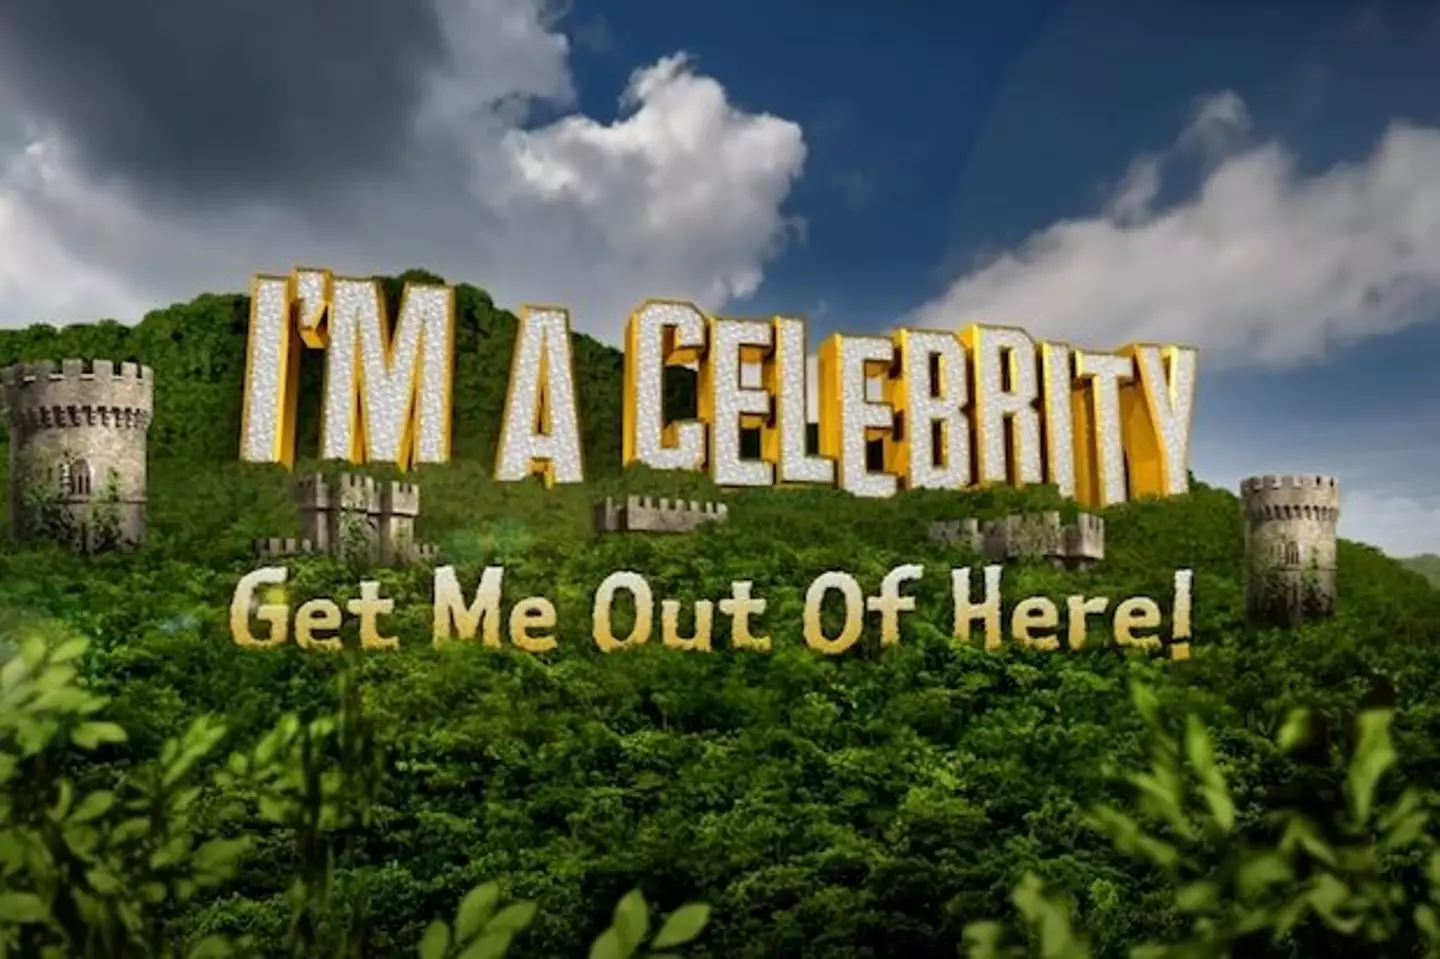 I’m A Celebrity is soon to be back on our screens.